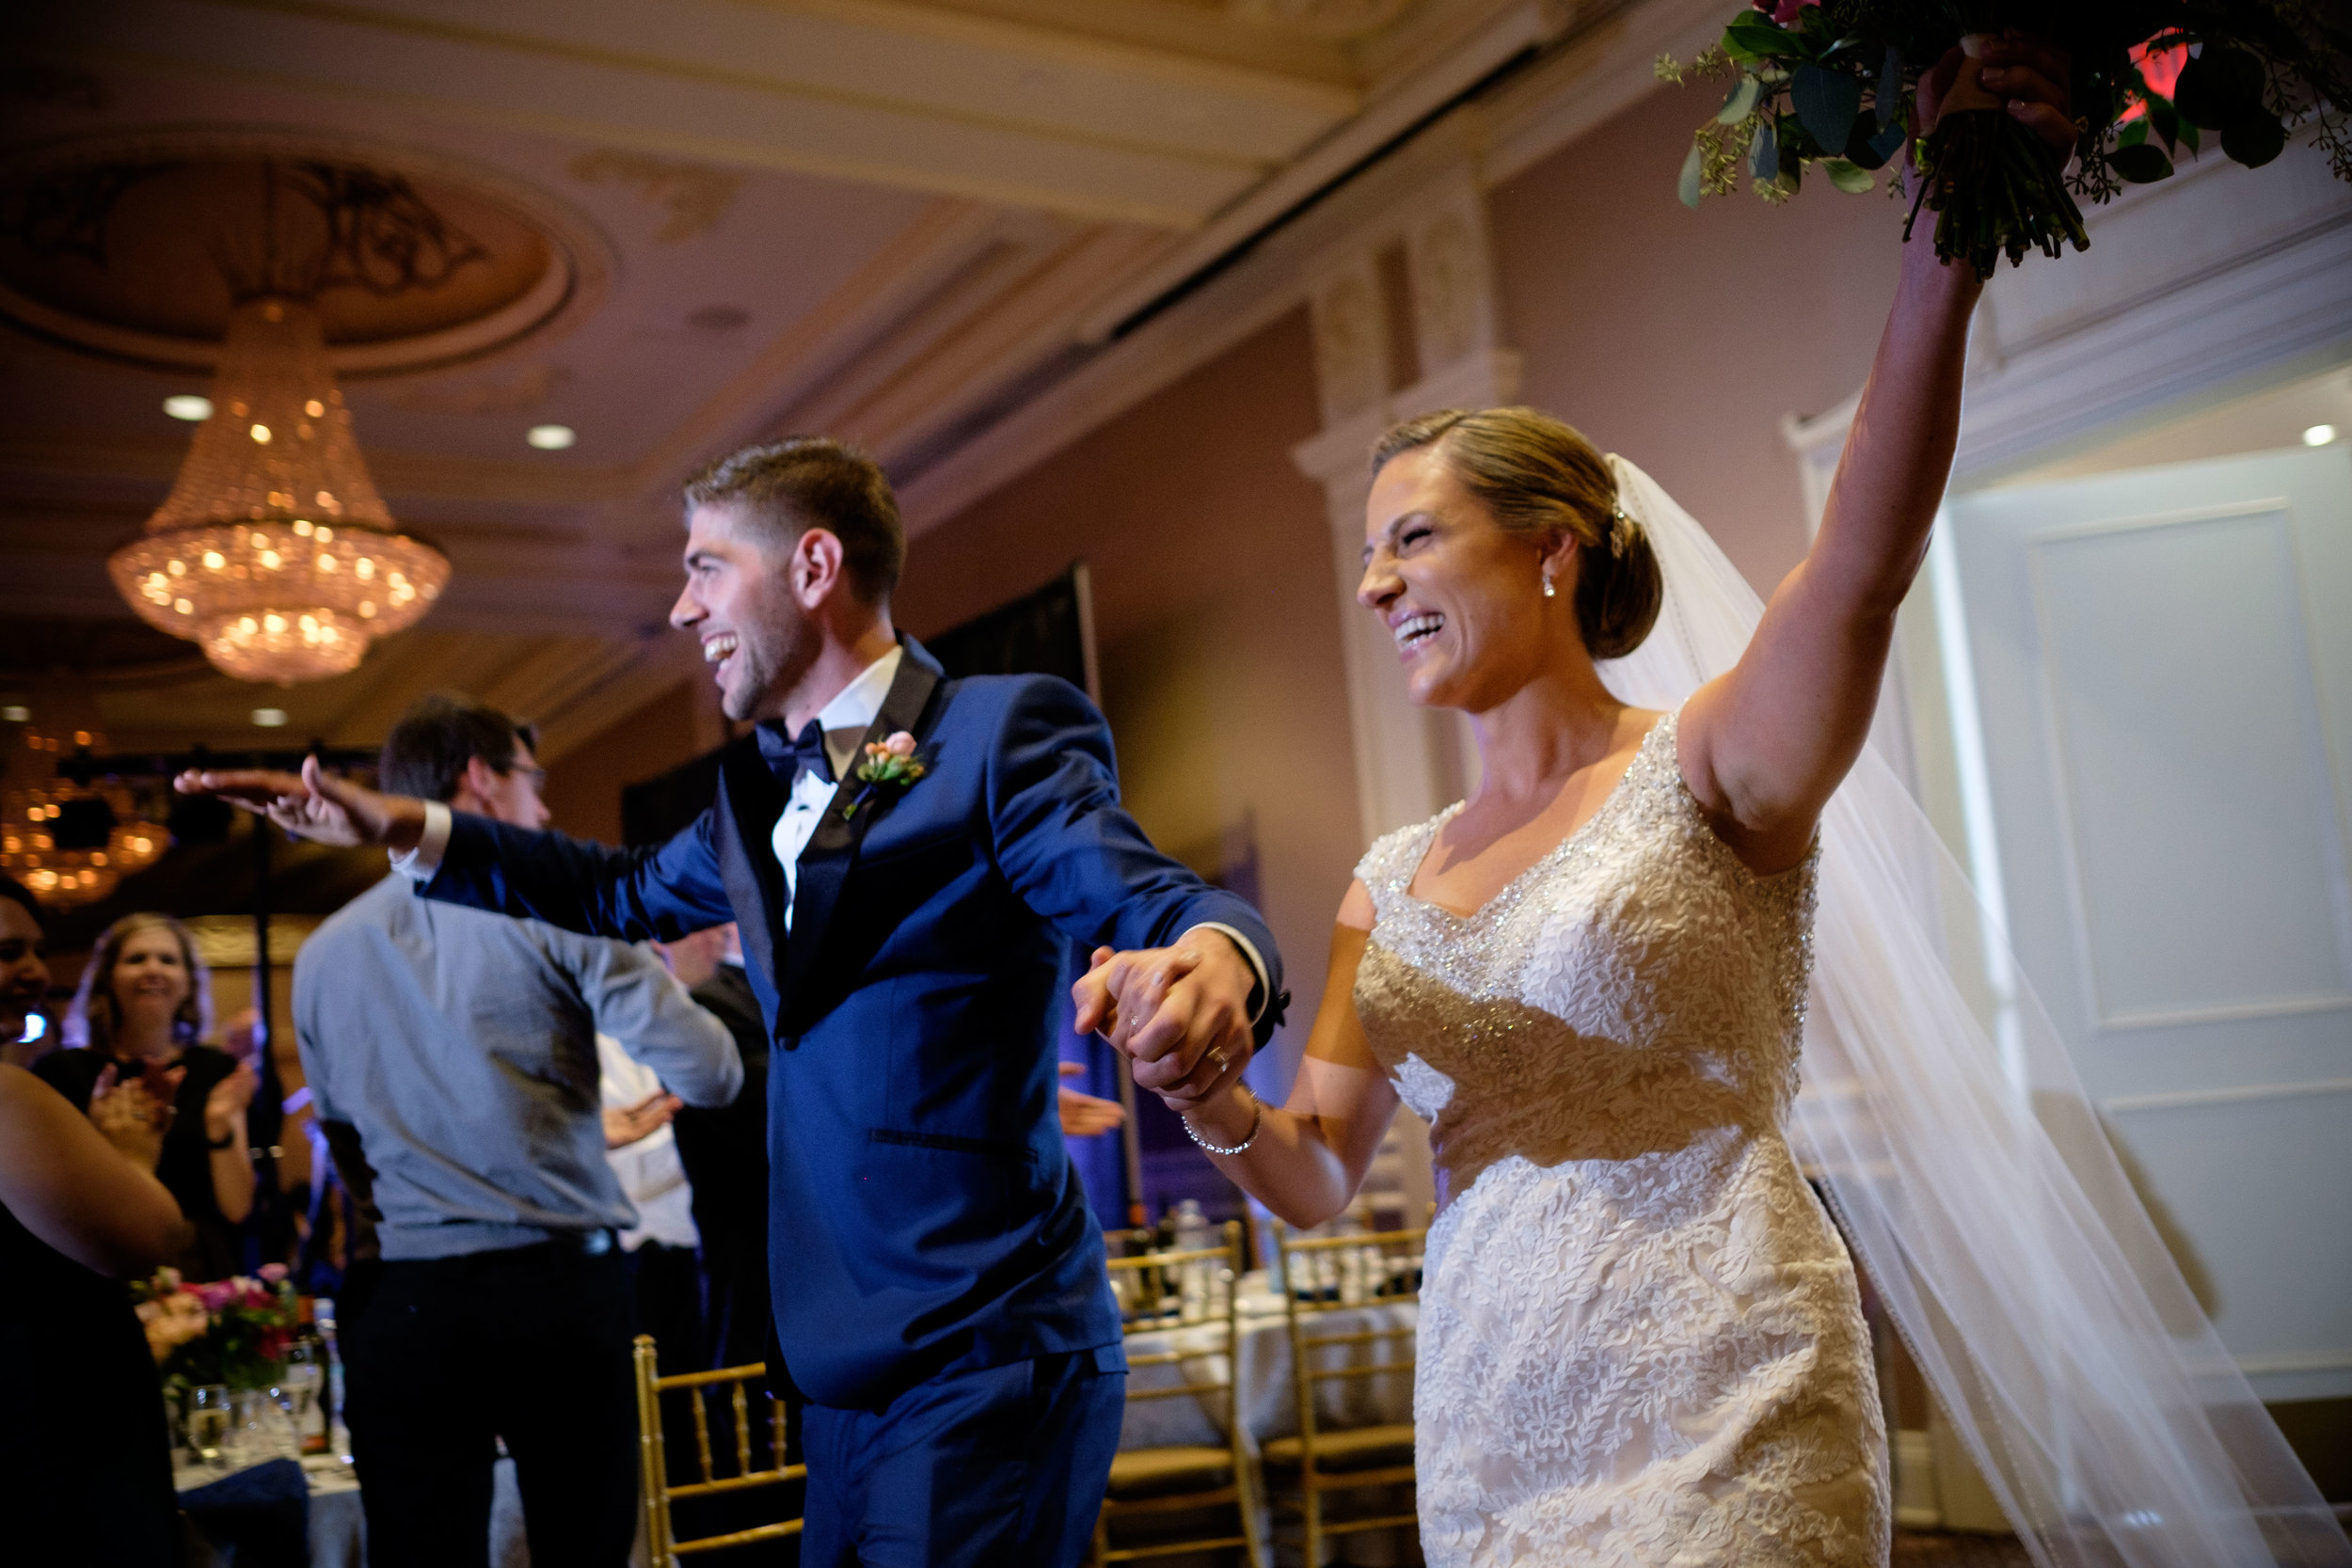  Sabrina + Zach make their grand entrance into their wedding reception at the Jewel Event Centre in Toronto.&nbsp; 